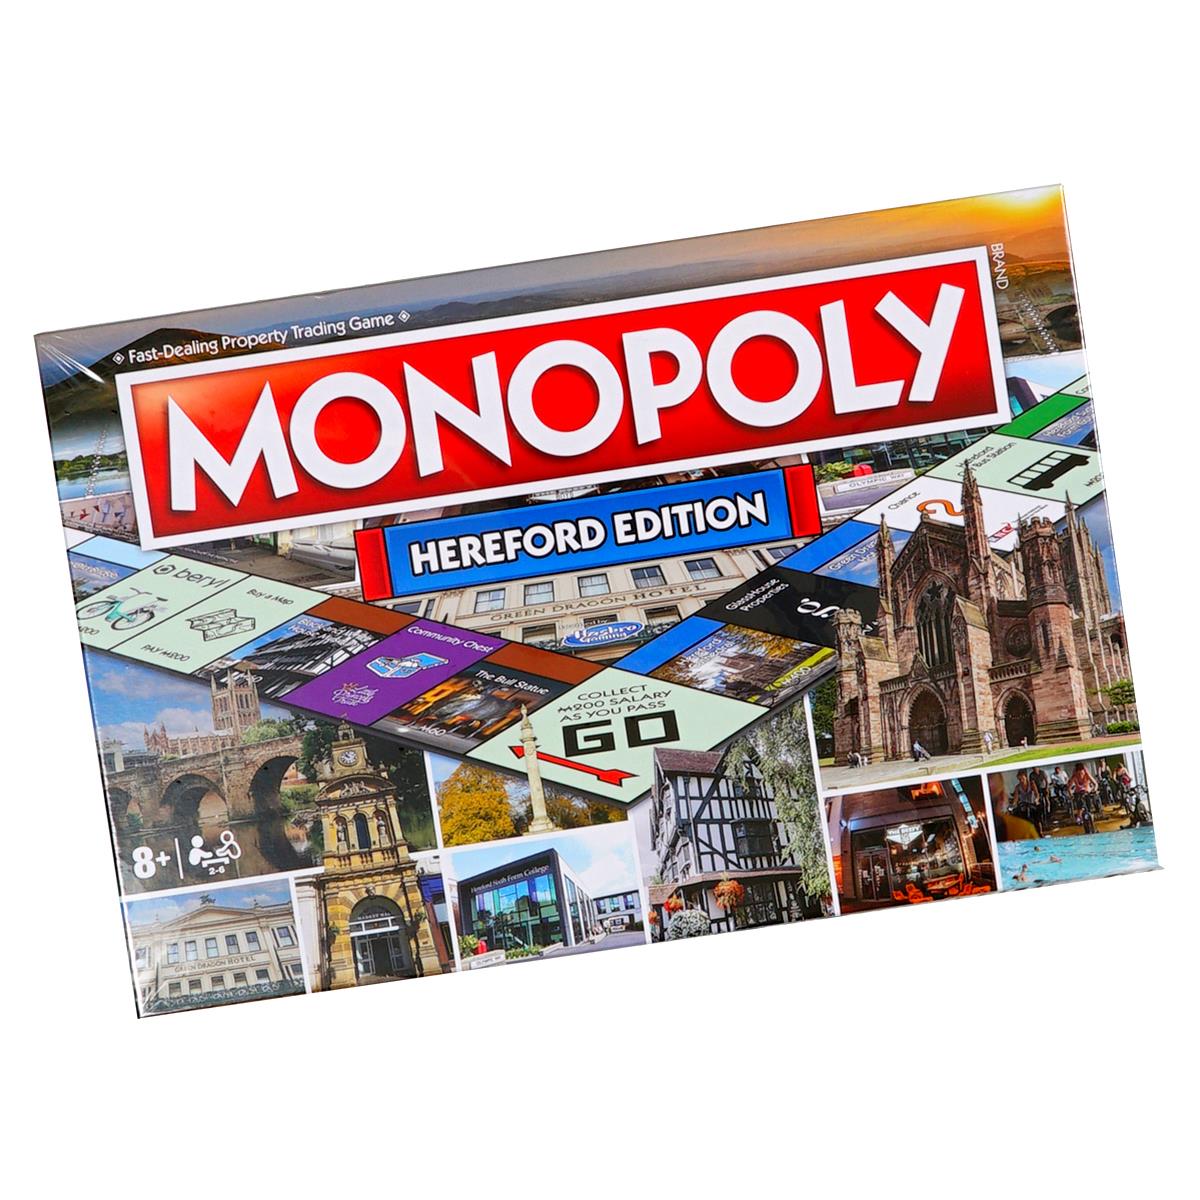 What subjects are included in the Hereford Monopoly edition?